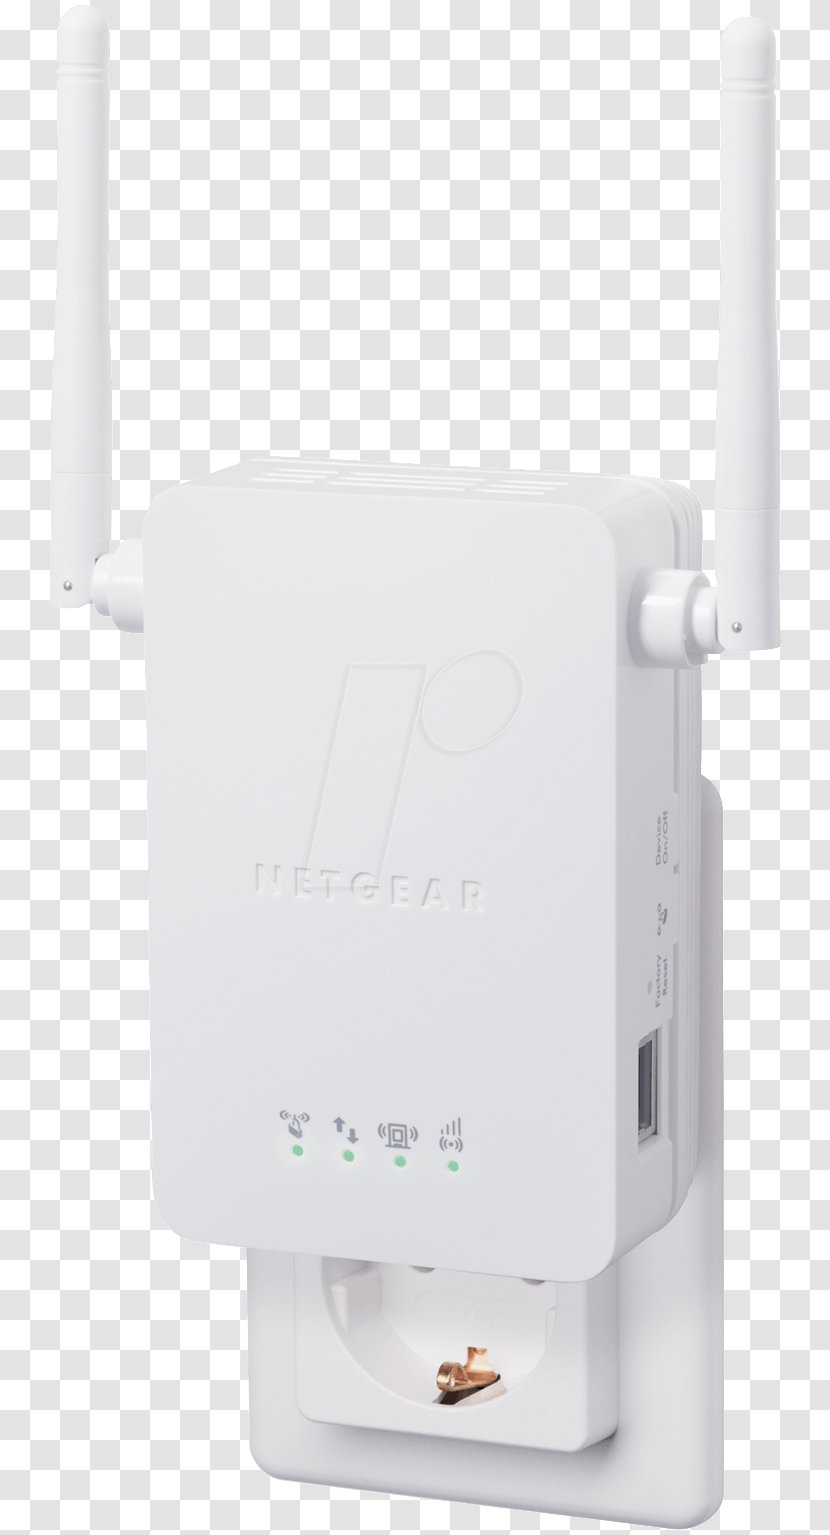 Wireless Access Points Repeater Wi-Fi Netgear Router - Electrical Cable Transparent PNG